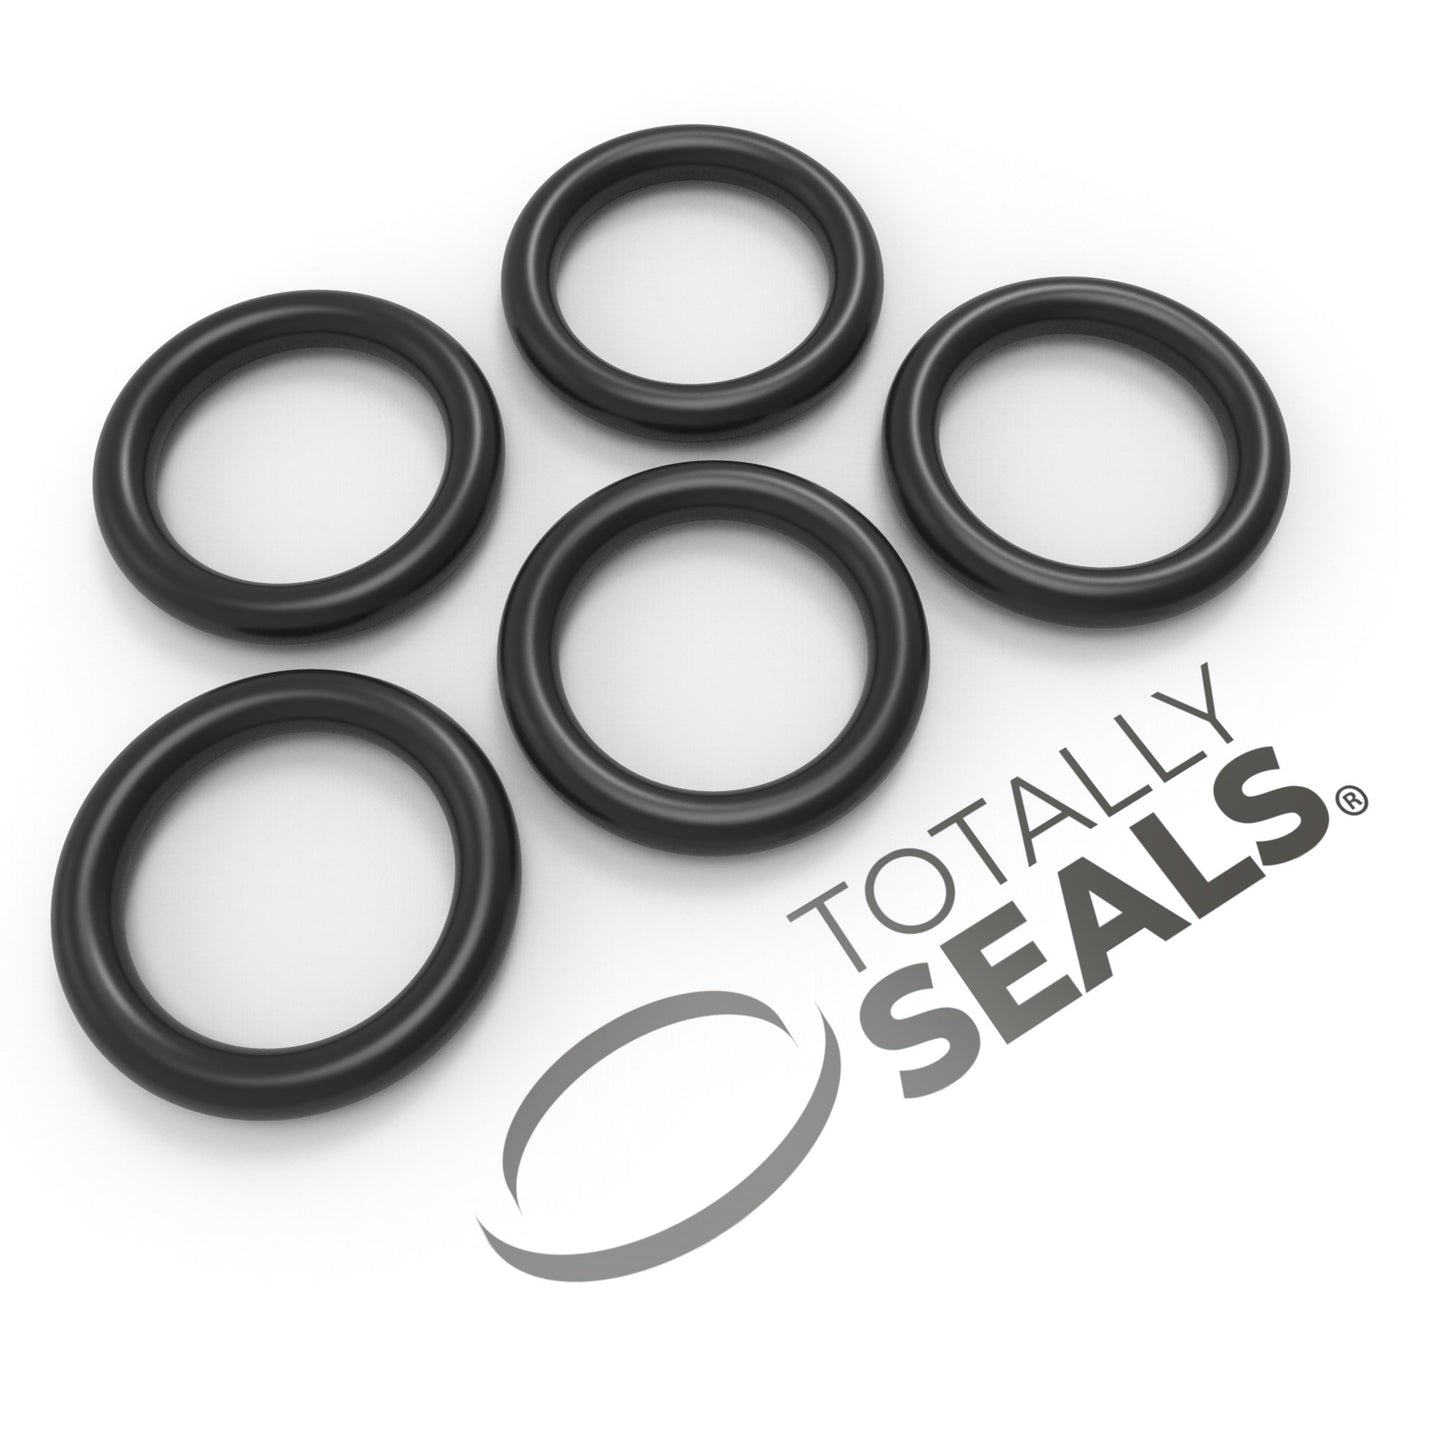 1 1/16" x 1/8" (BS215) Imperial Nitrile Rubber O-Rings - Totally Seals®